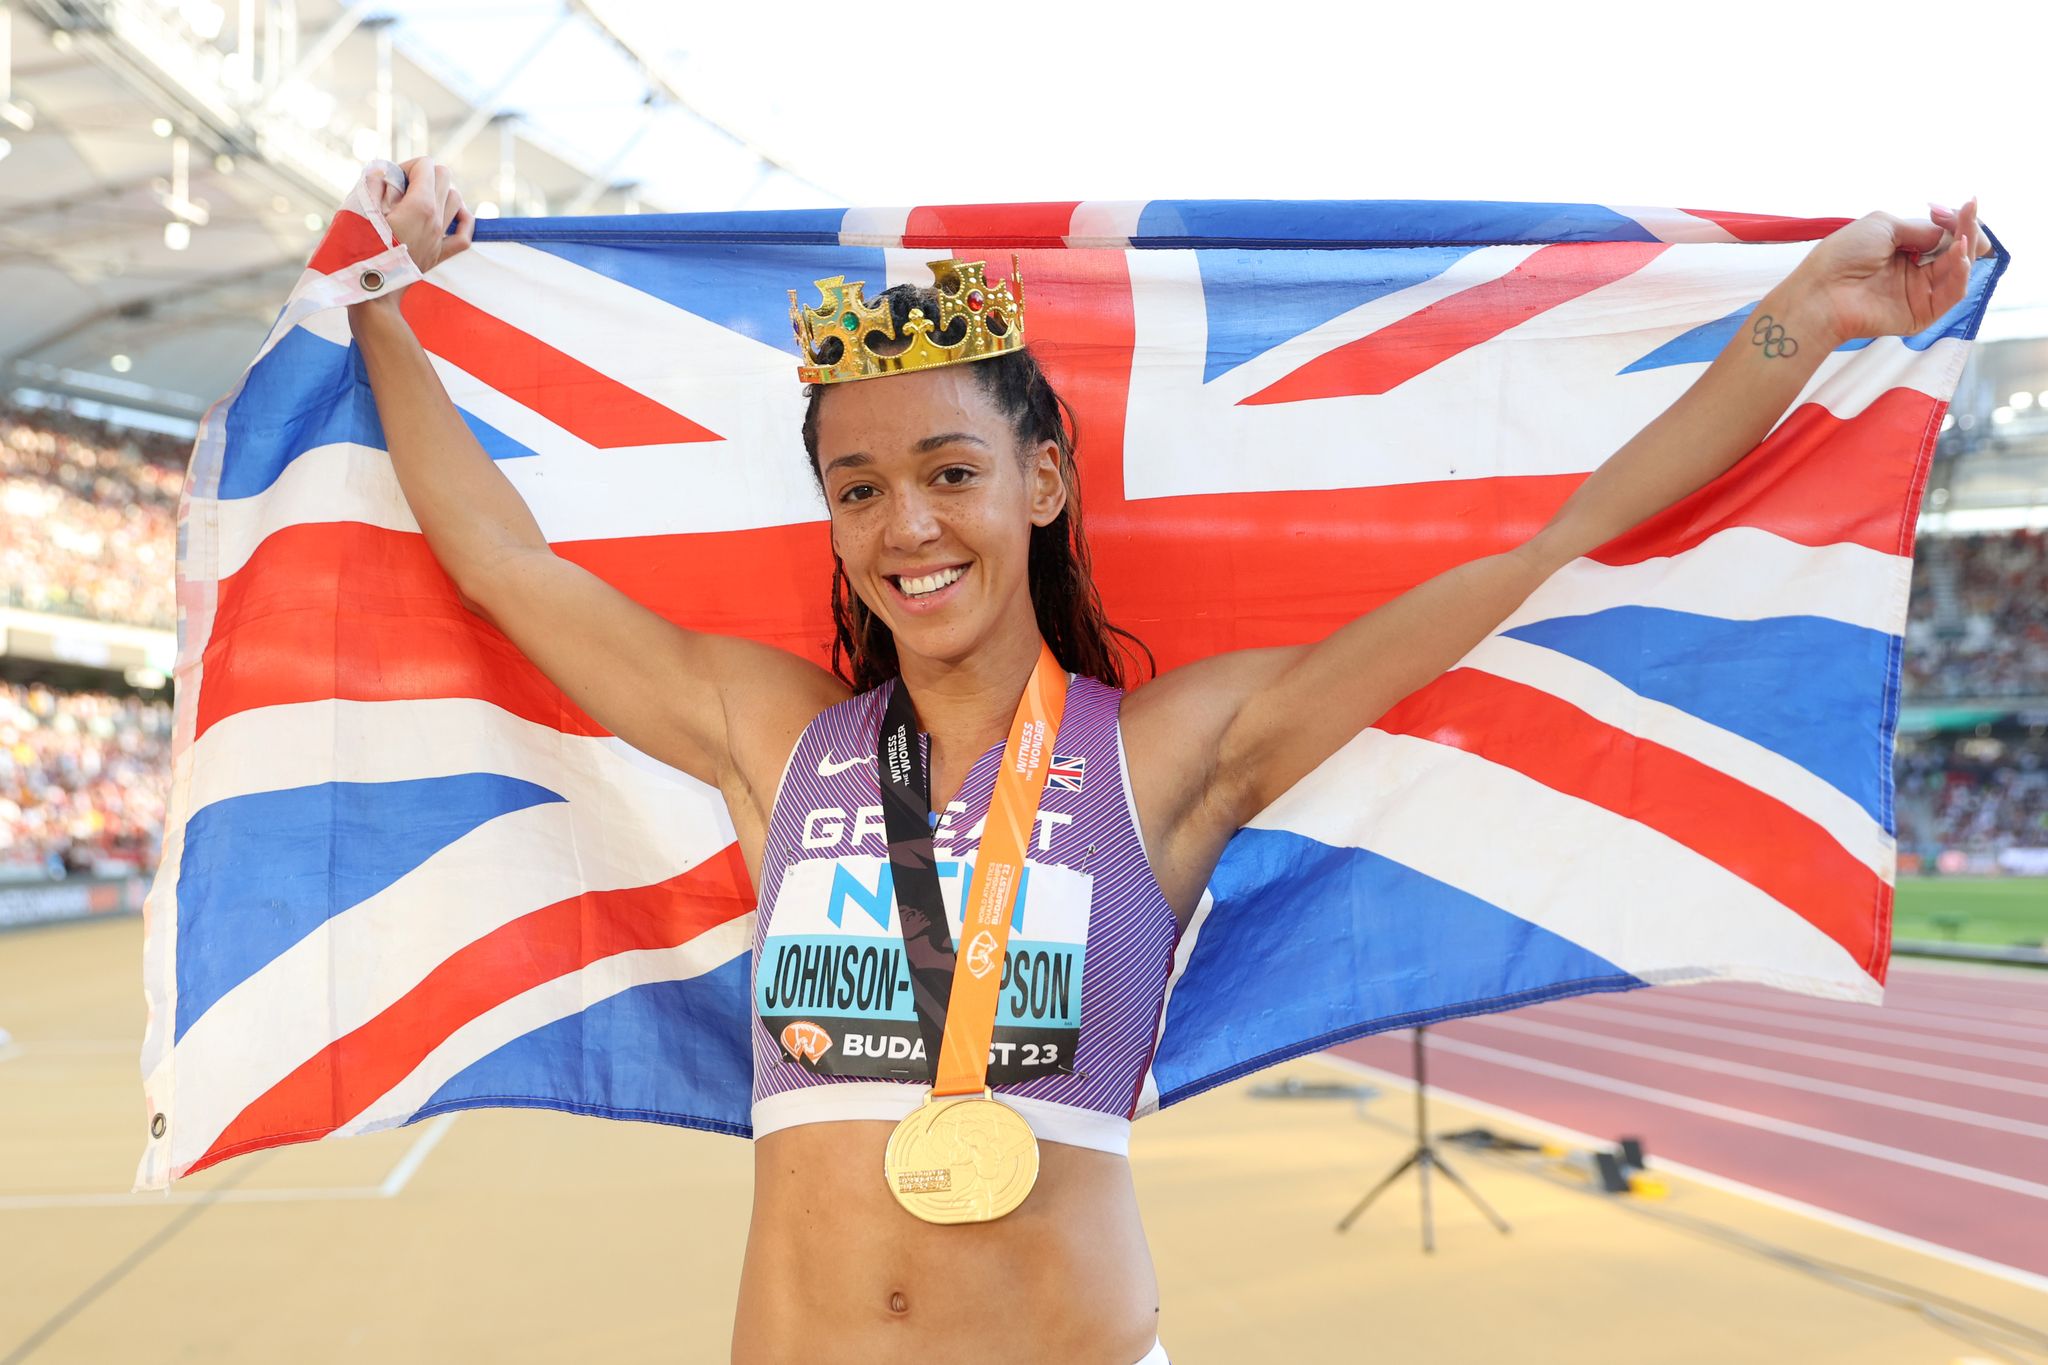 budapest, hungary august 20 katarina johnson thompson of team great britain celebrates with a crown and a great britain flag after winning gold in the womens 800m heptathlon final during day two of the world athletics championships budapest 2023 at national athletics centre on august 20, 2023 in budapest, hungary photo by michael steelegetty images